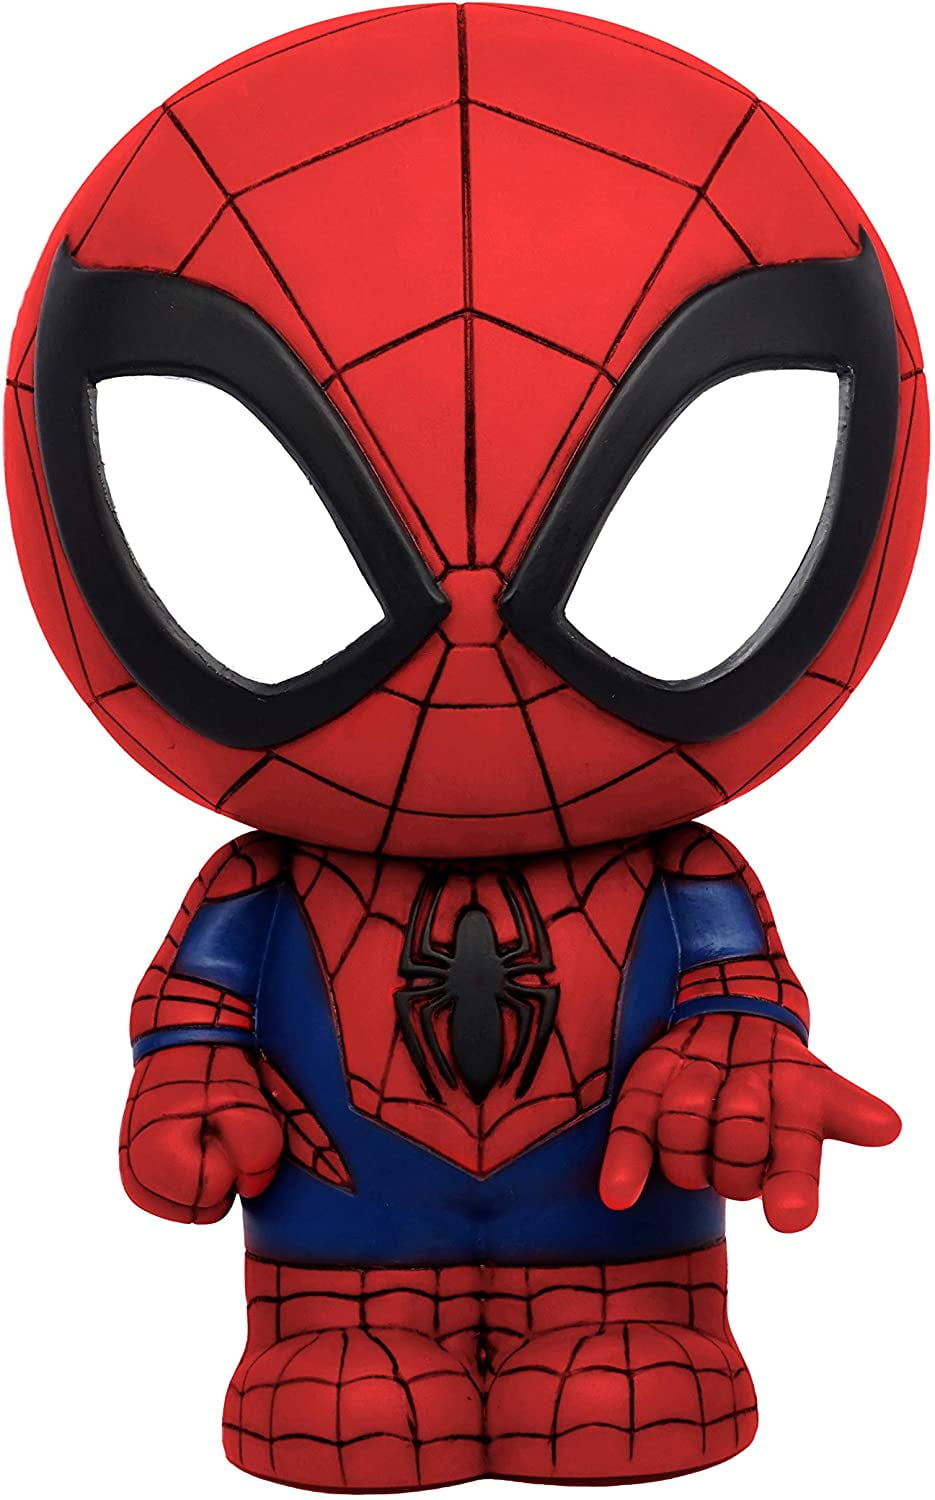 Spider Man Marvel Comics Coin Bank Bust New ages 4+ 